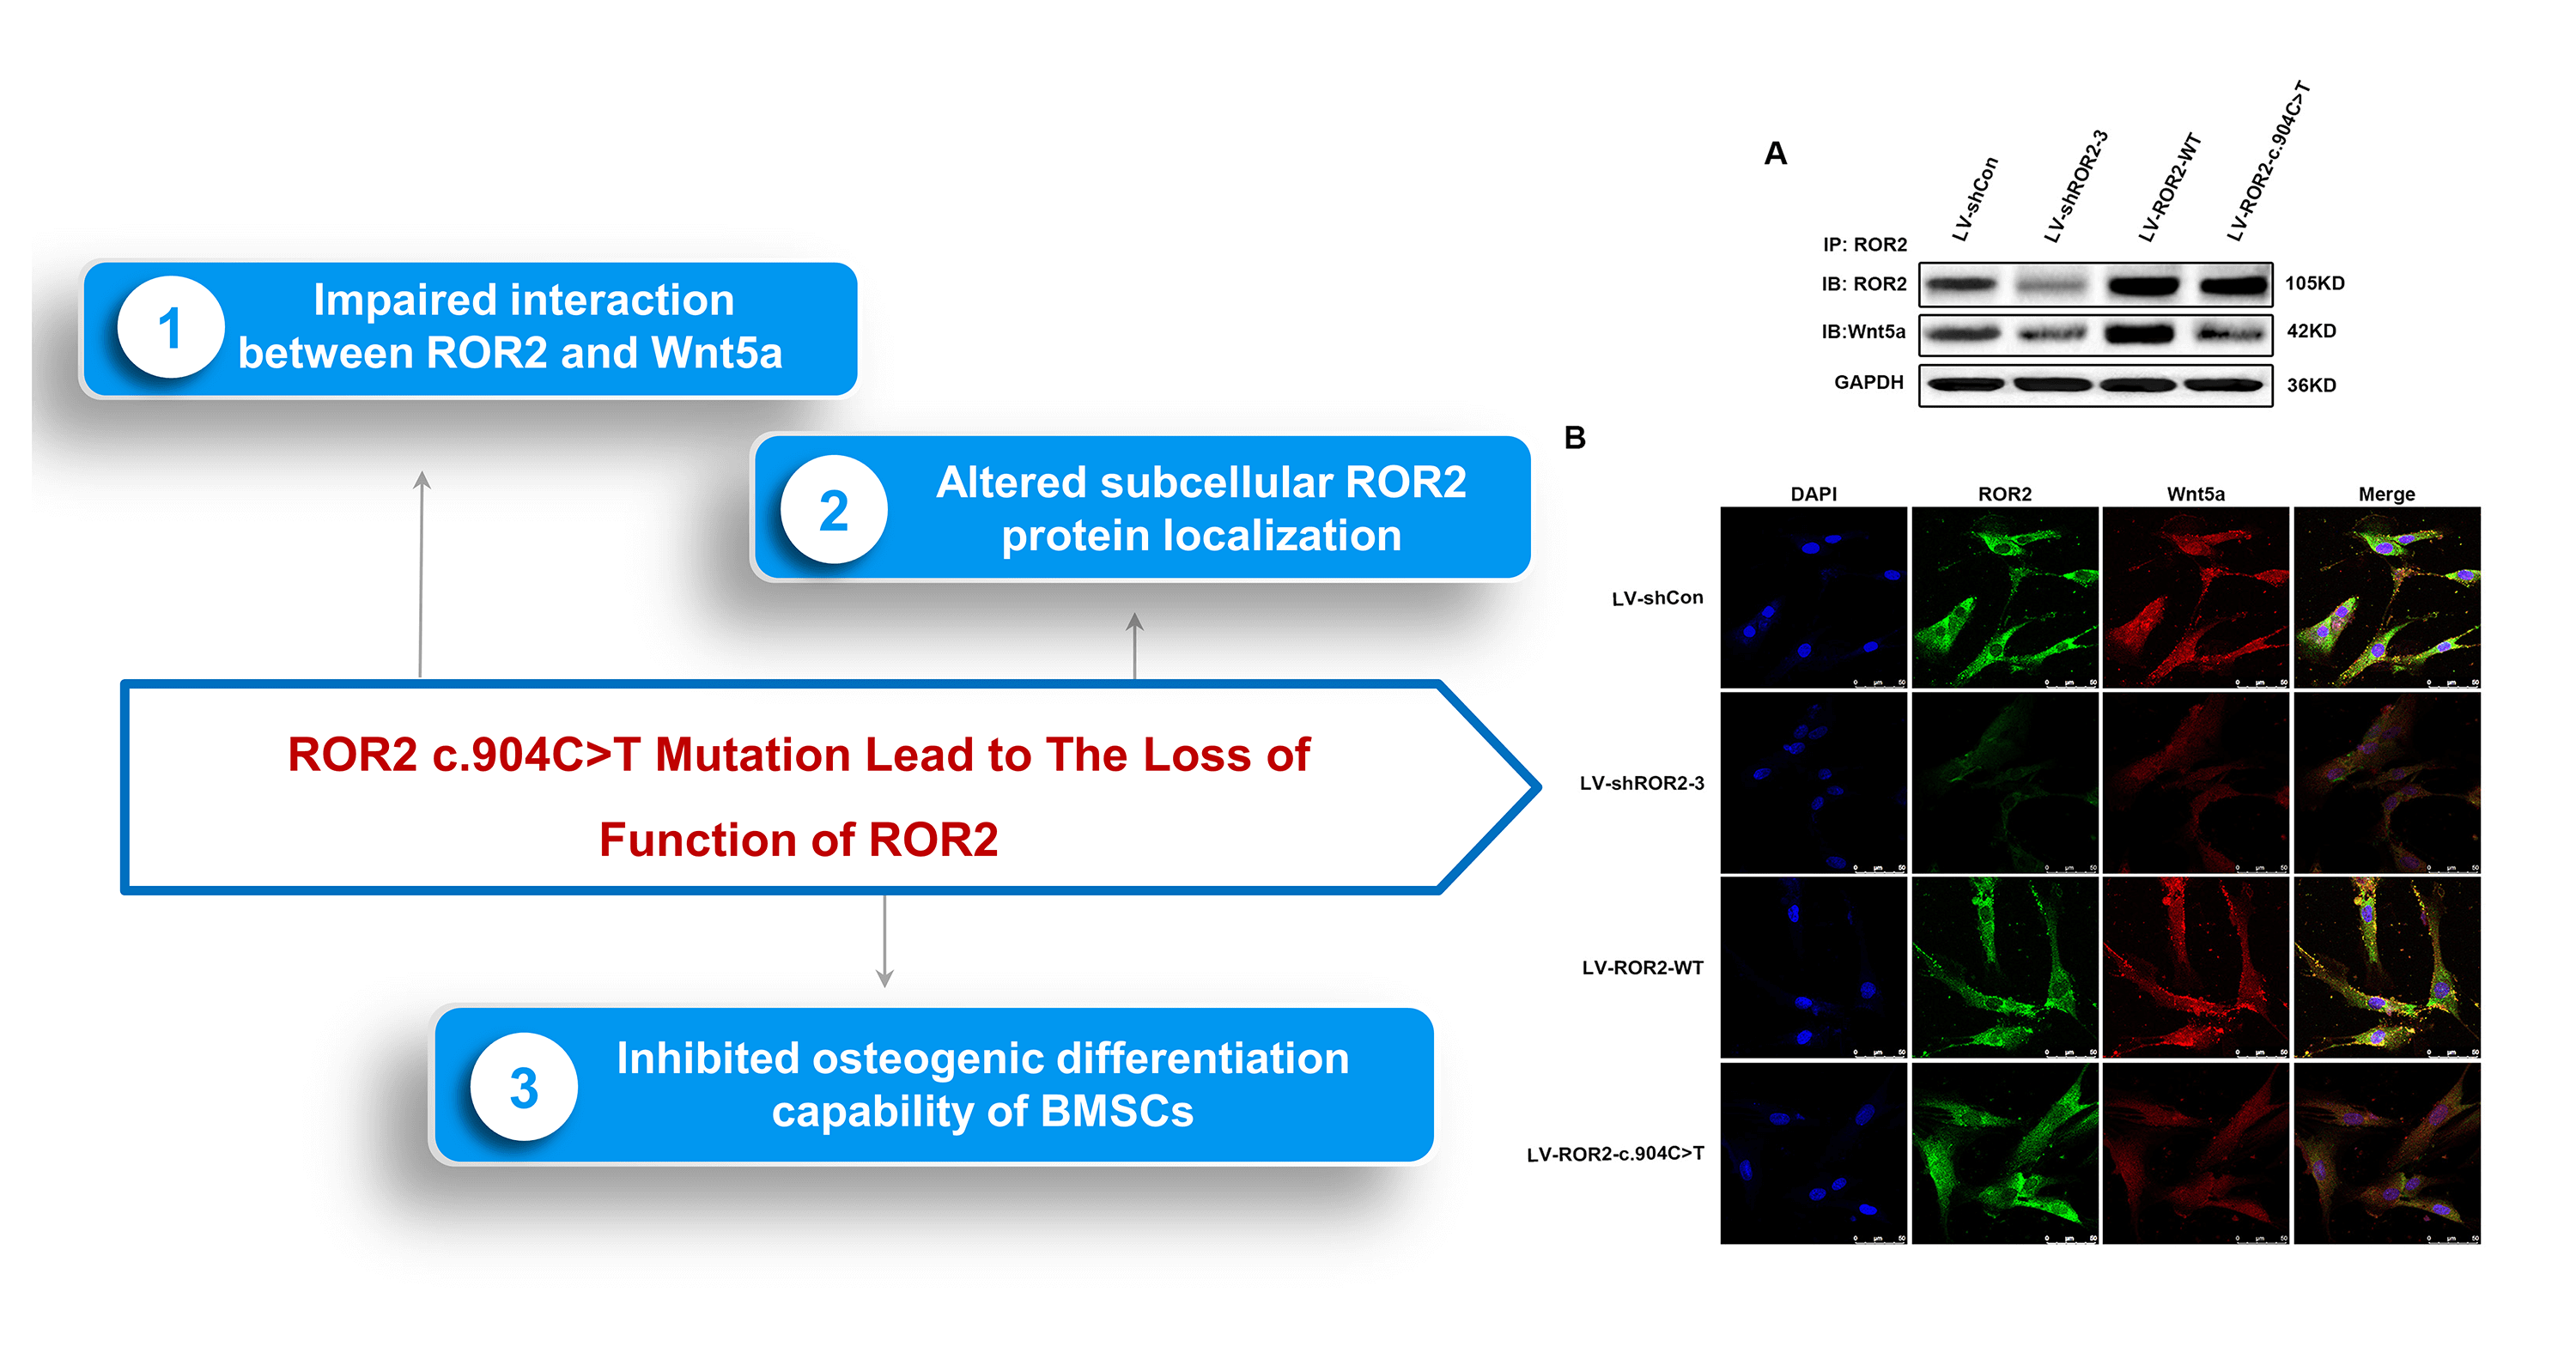 A novel mutation in <i>ROR2</i> led to the loss of function of <i>ROR2</i> and inhibited the osteogenic differentiation capability of bone marrow mesenchymal stem cells (BMSCs)